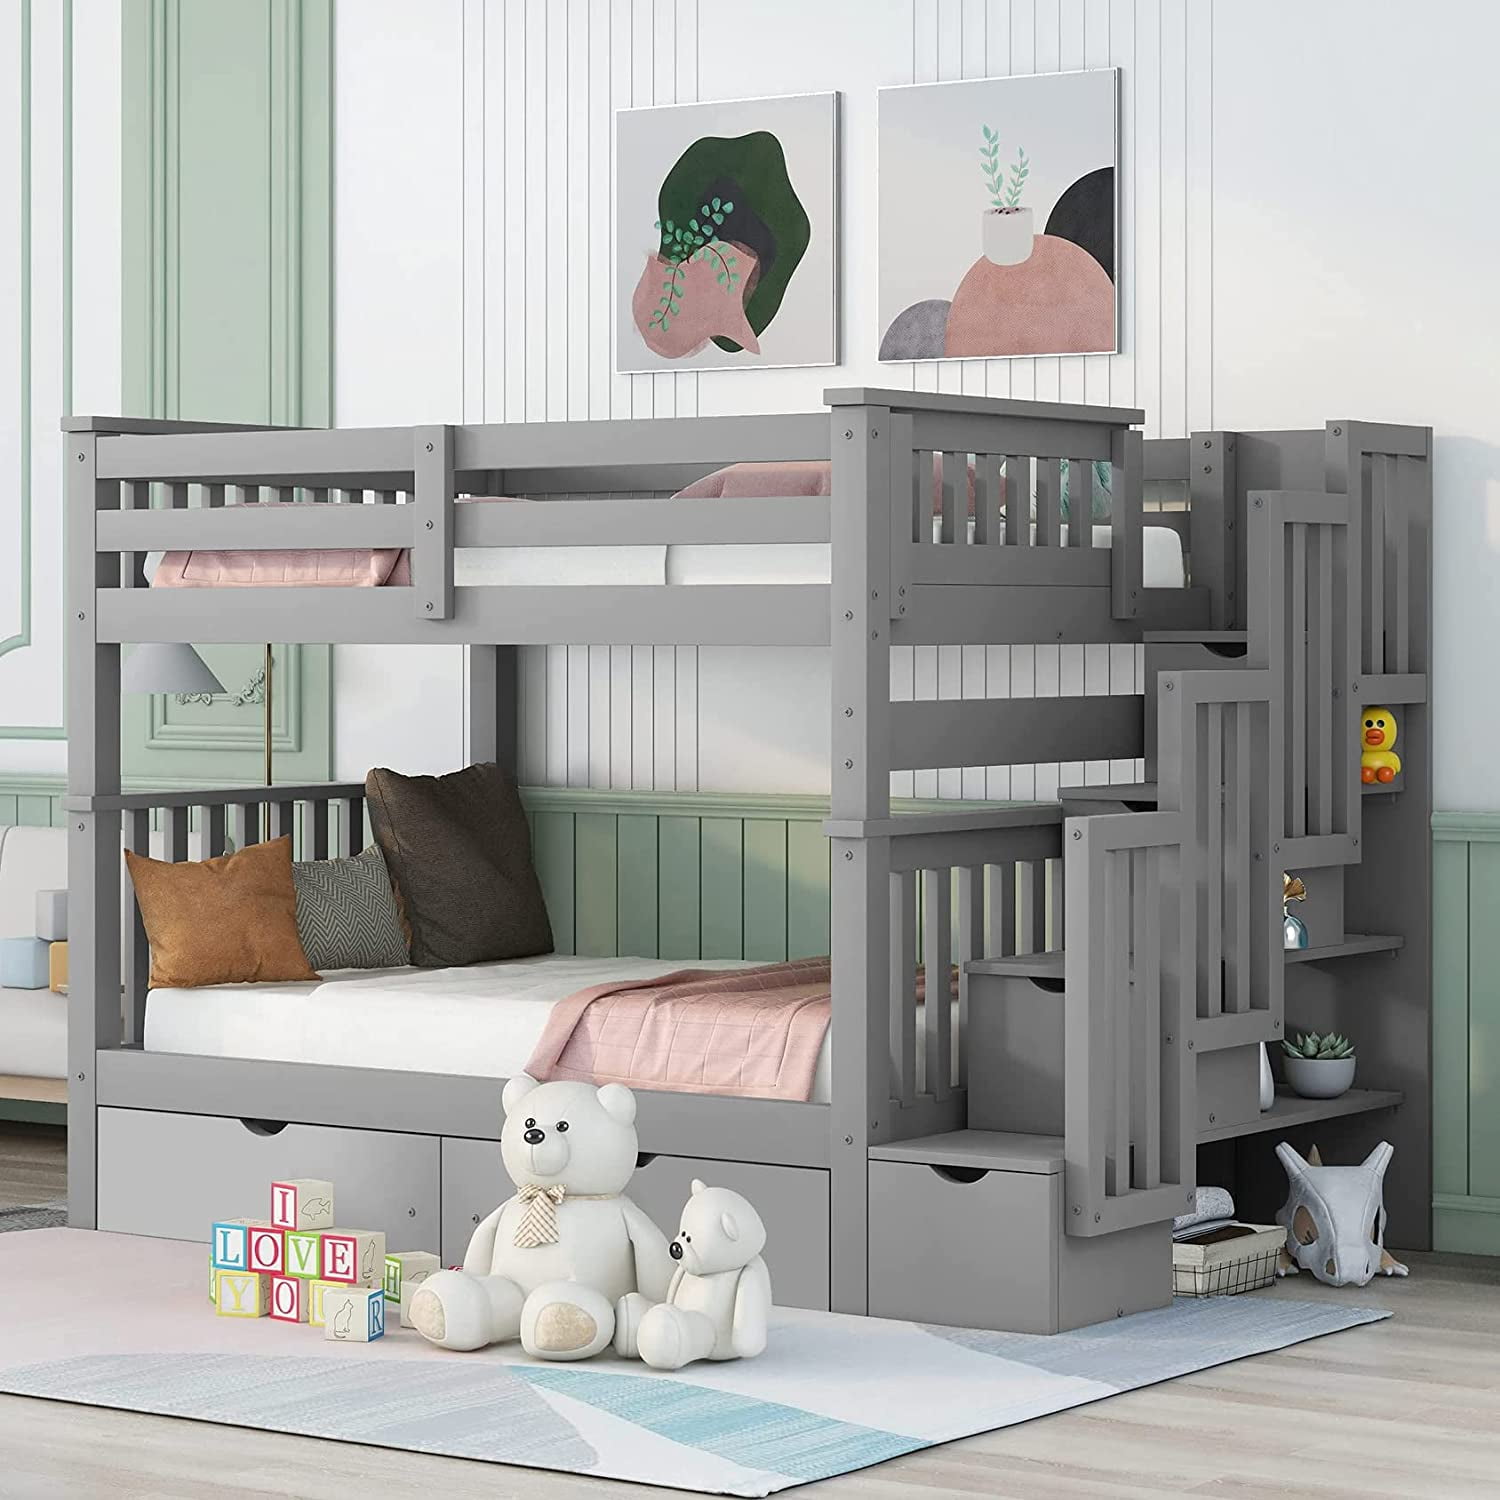 Bellemave Full Bunk Bed with Staircase, 6 Drawers, Under-Shelf Storage ...